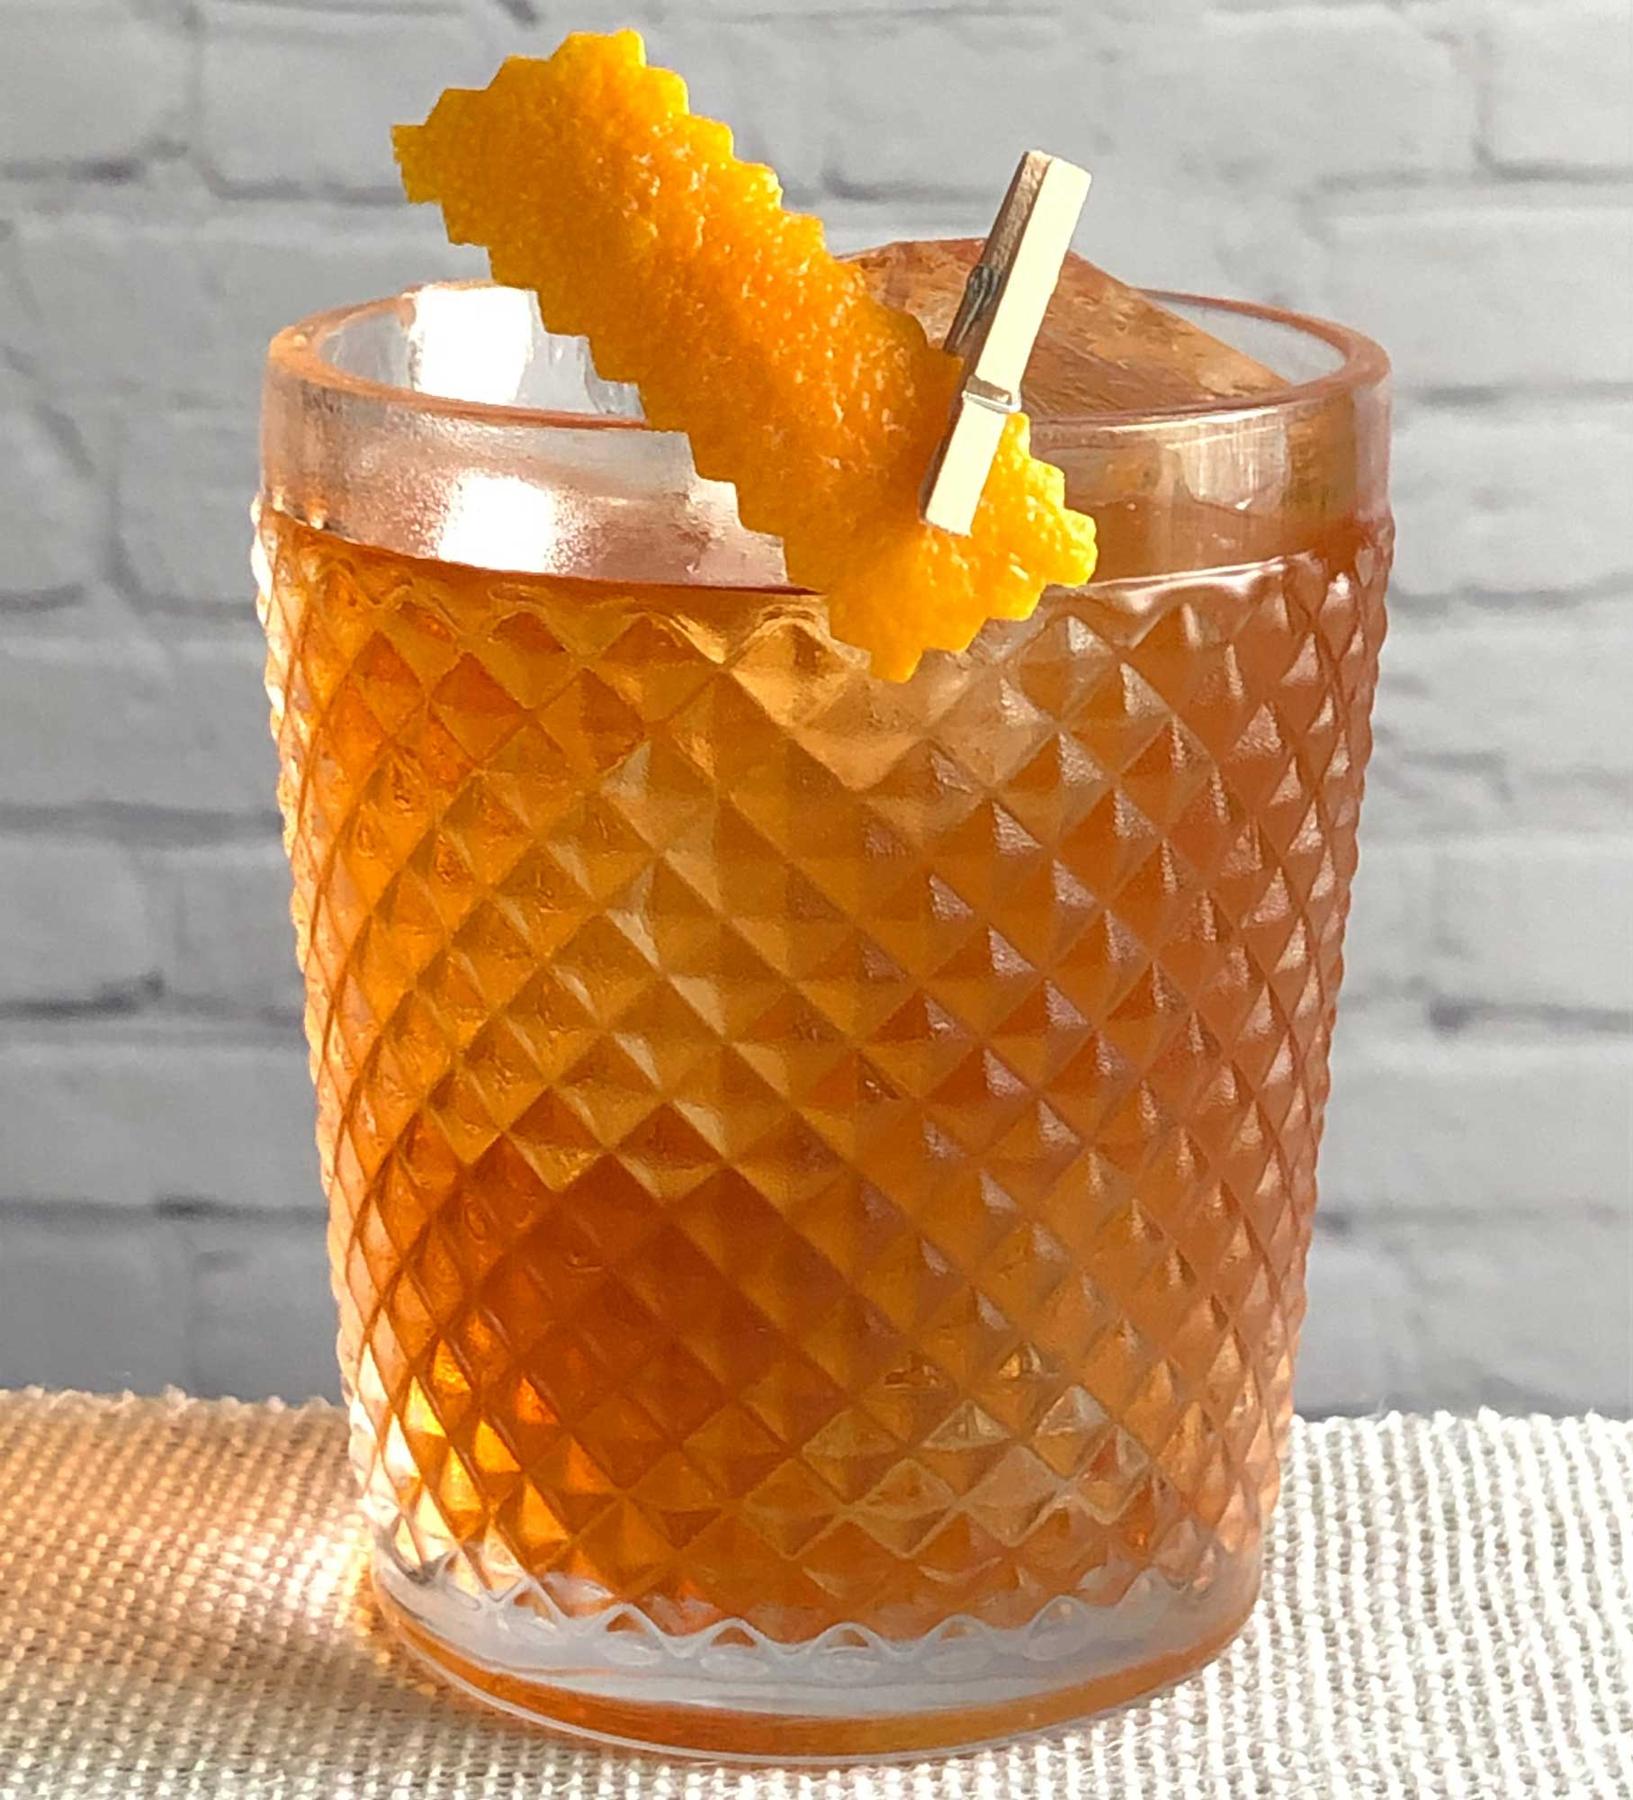 An example of the Double Dagger, the mixed drink (drink), by Jason Harris, featuring Hayman’s Royal Dock Navy Strength Gin, Cardamaro Vino Amaro, Aperitivo Cappelletti, Dolin Blanc Vermouth de Chambéry, orange bitters, and orange twist; photo by Lee Edwards